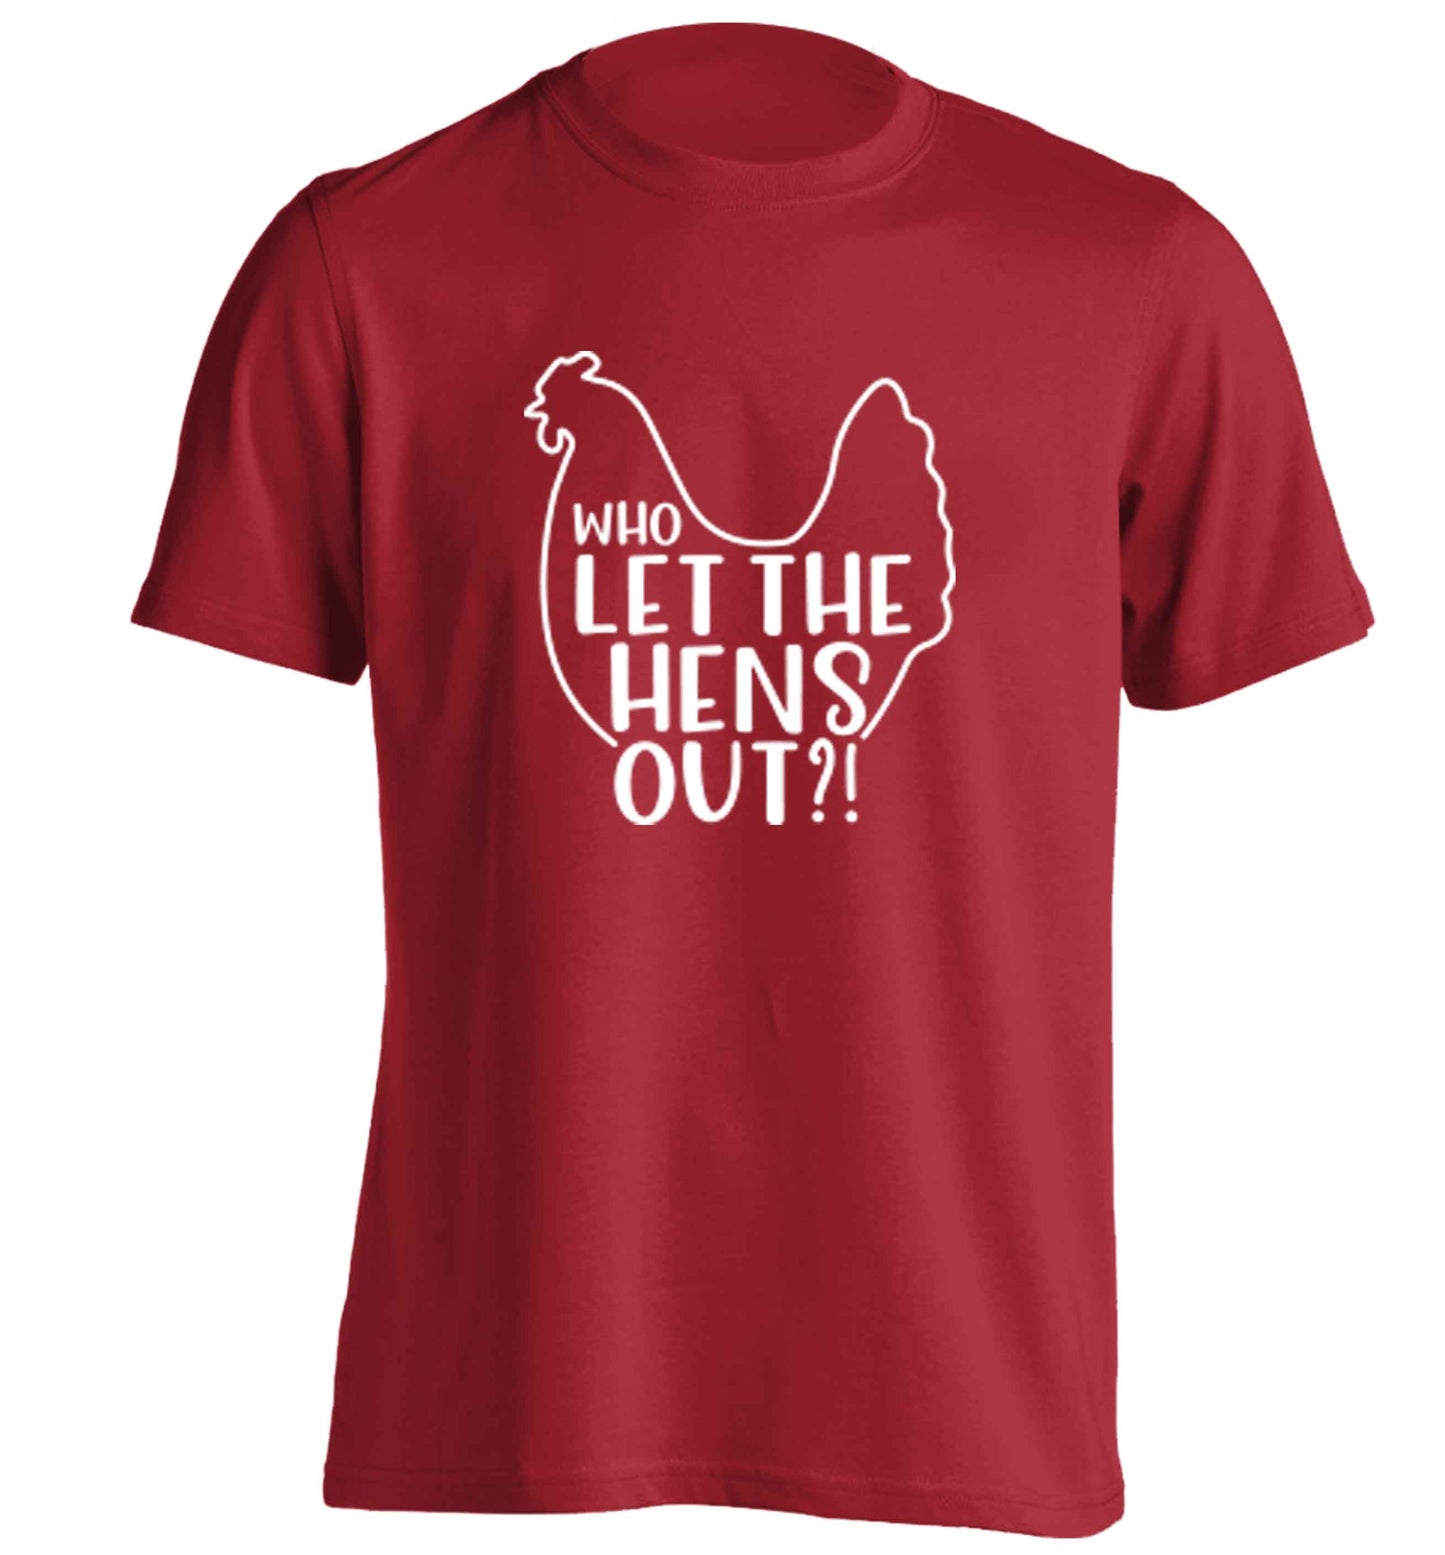 Who let the hens out adults unisex red Tshirt 2XL